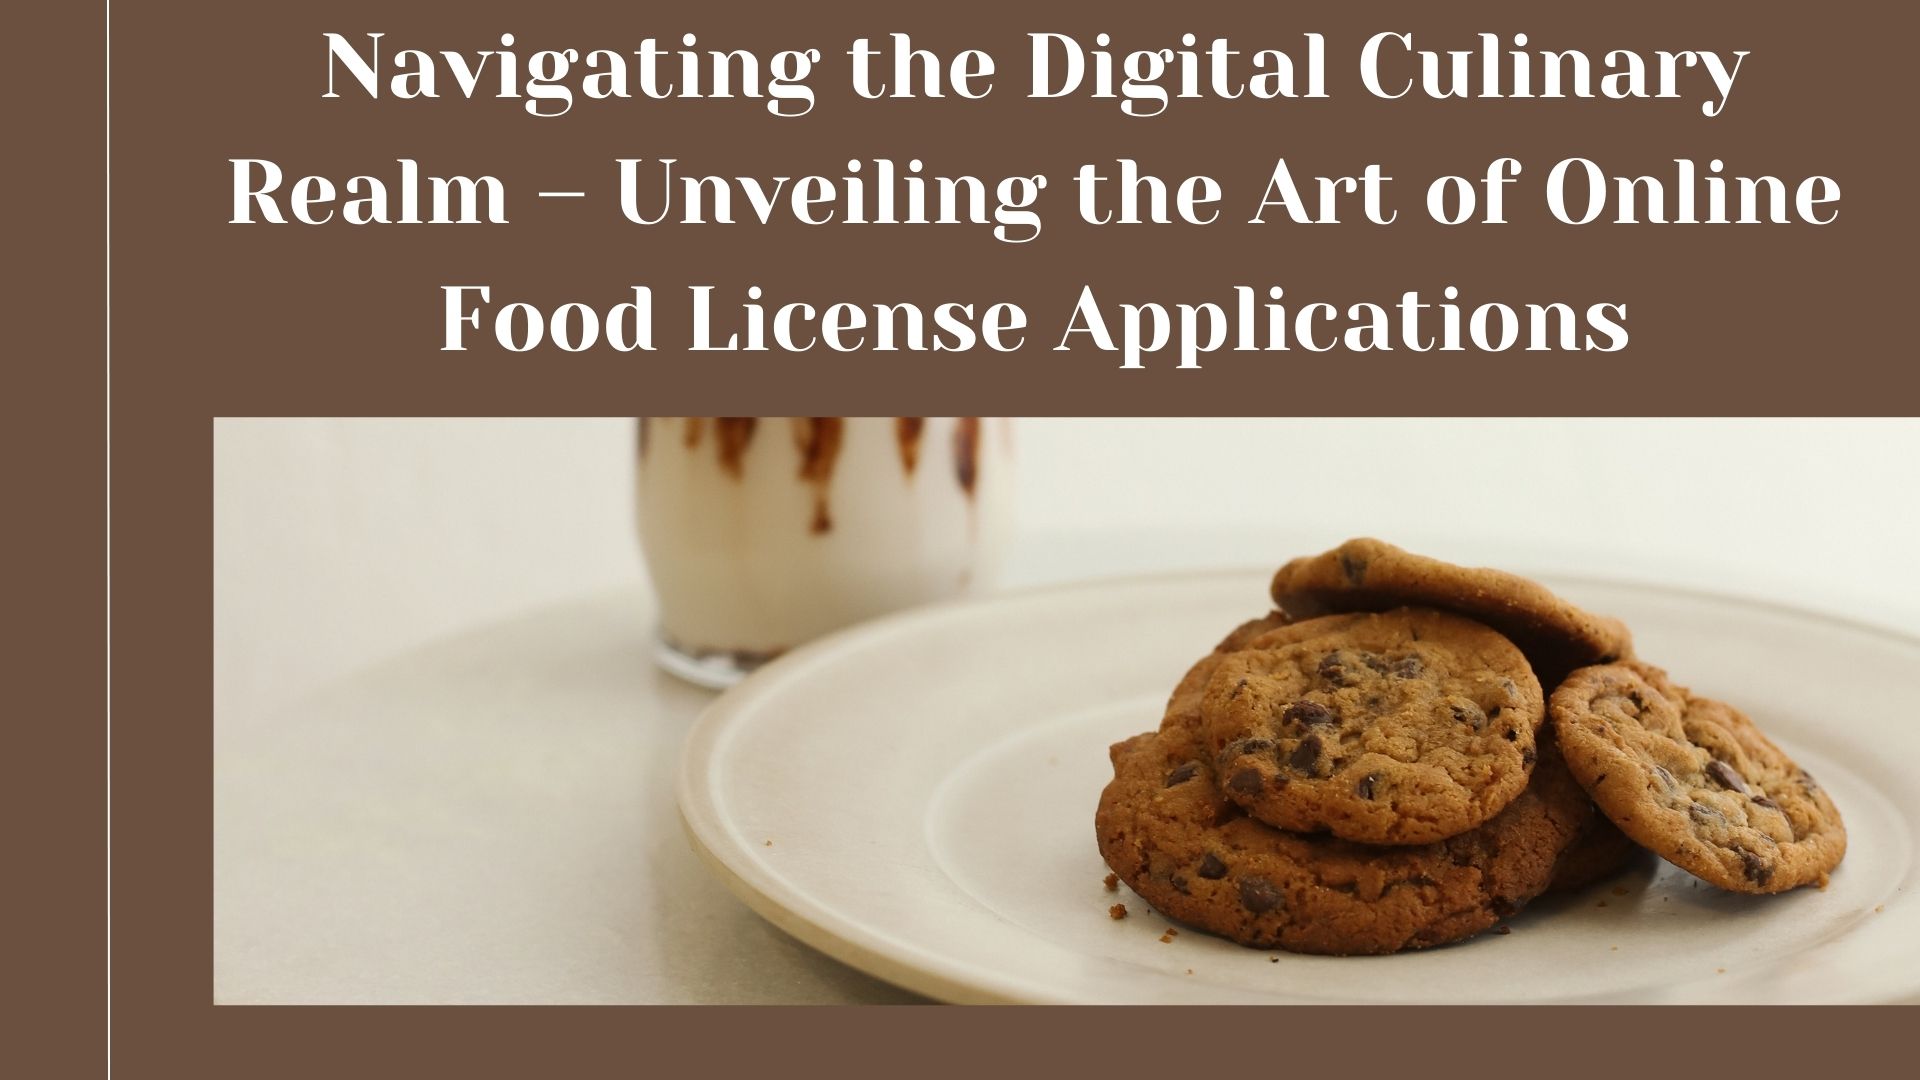 Navigating the Digital Culinary Realm – Unveiling the Art of Online Food License Applications